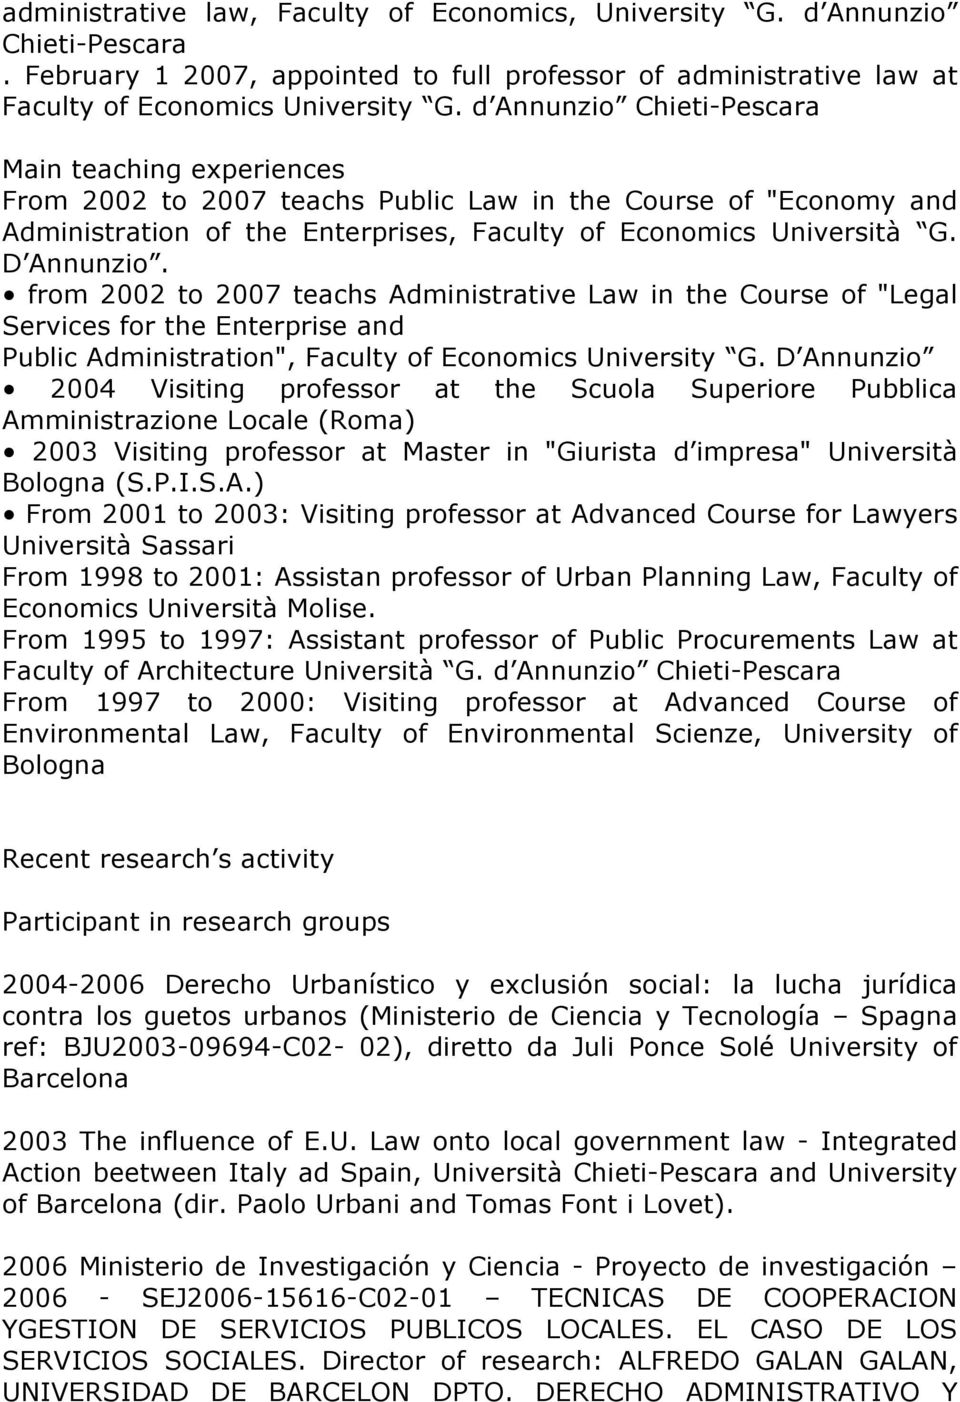 from 2002 to 2007 teachs Administrative Law in the Course of "Legal Services for the Enterprise and Public Administration", Faculty of Economics University G.